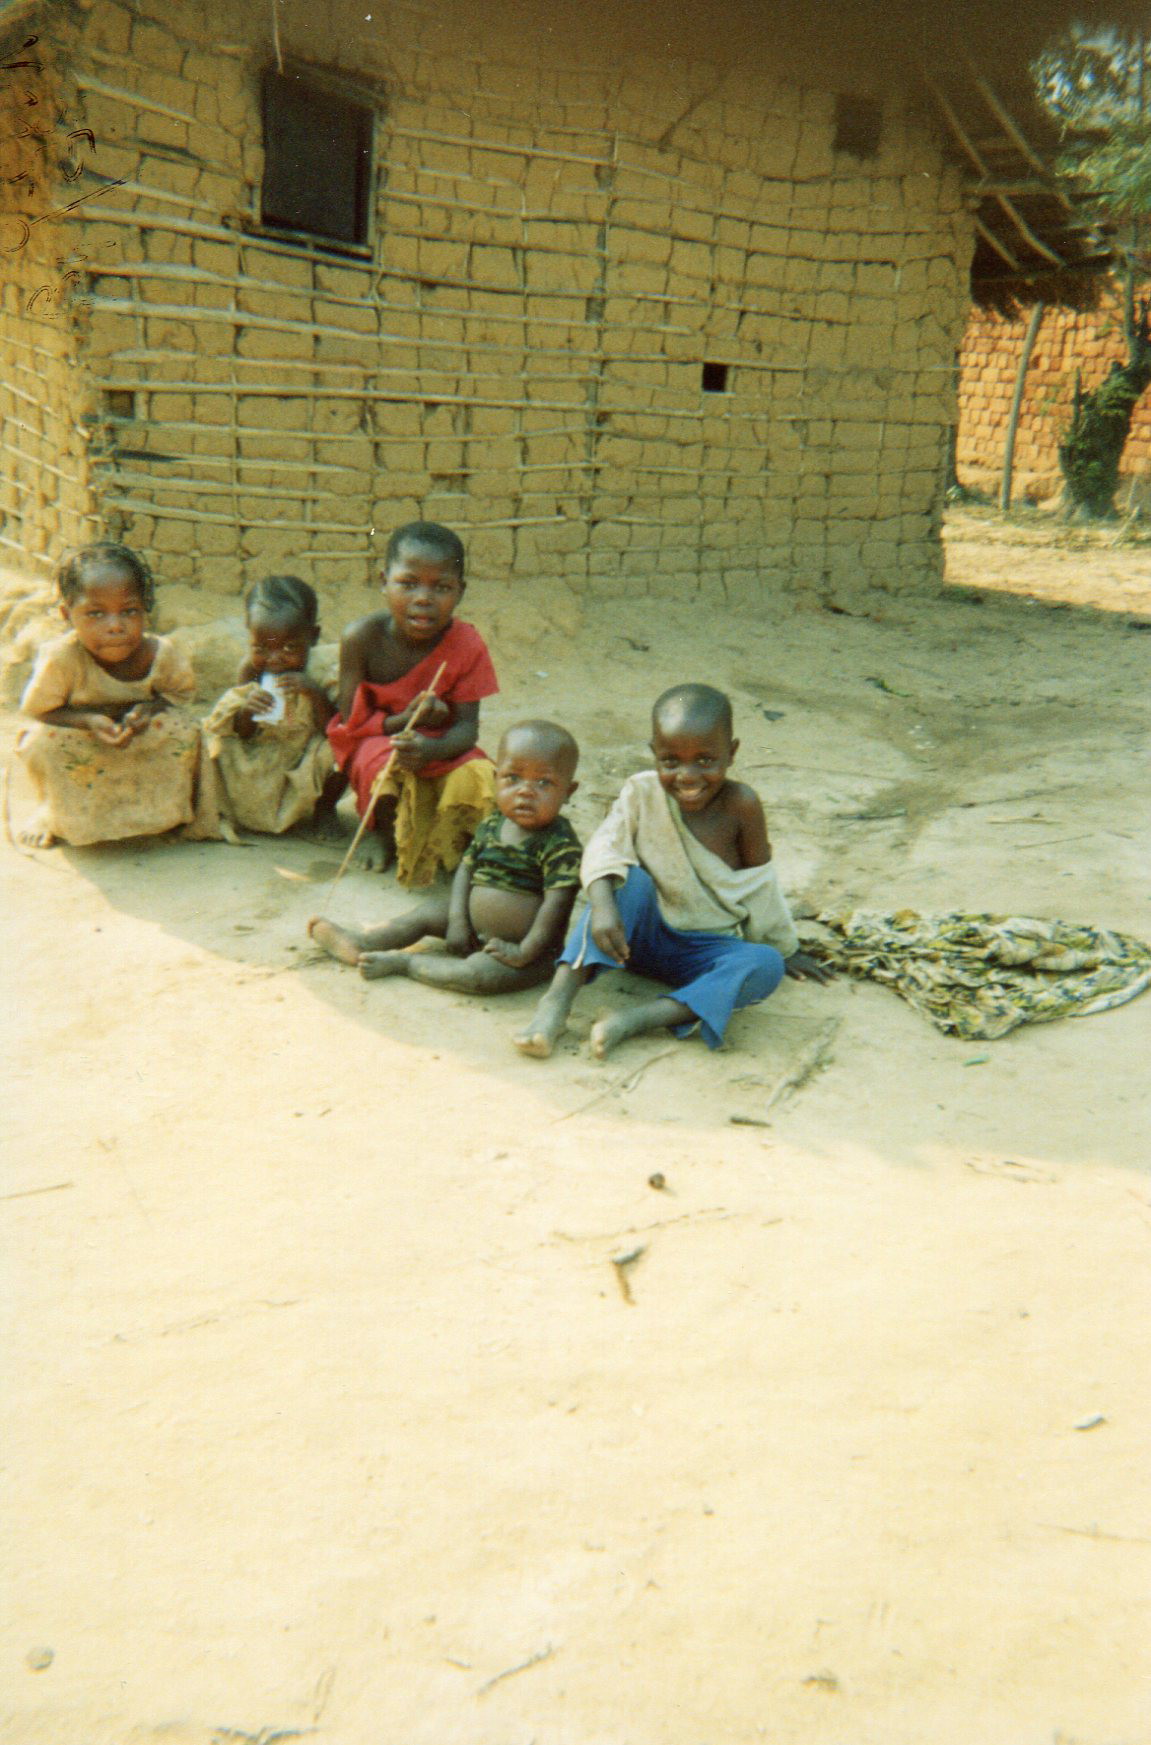  When I left the forest I met a lot of difficulties at home when I saw that all the kids did not have food.&nbsp; 